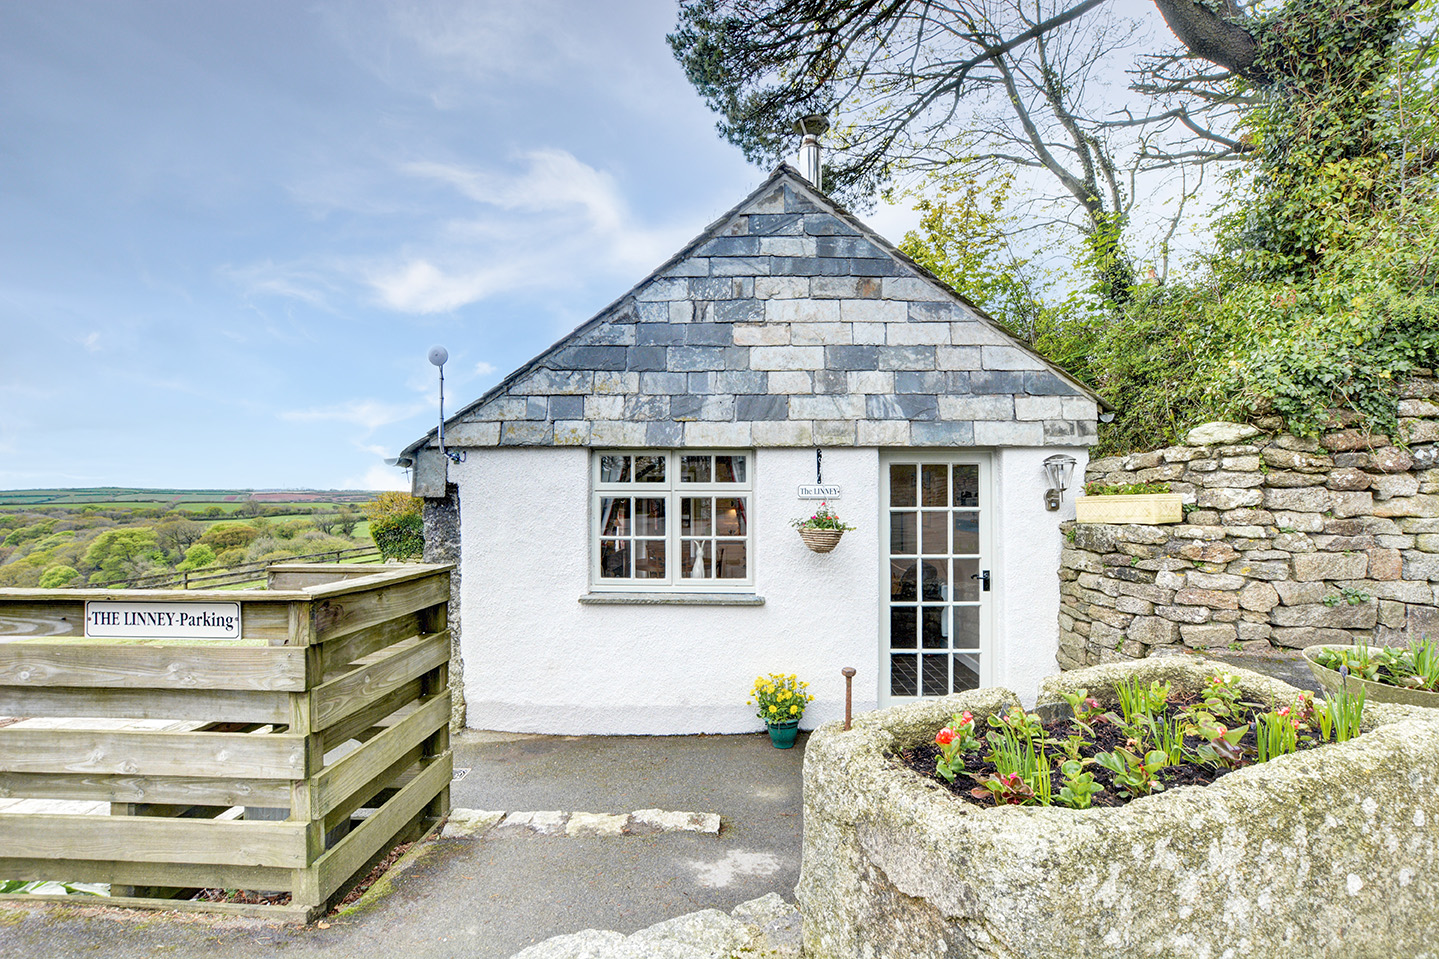 The outside of The Linney self catering cottage converted barn at Penrose Burden holiday cottages in Cornwall.jpg